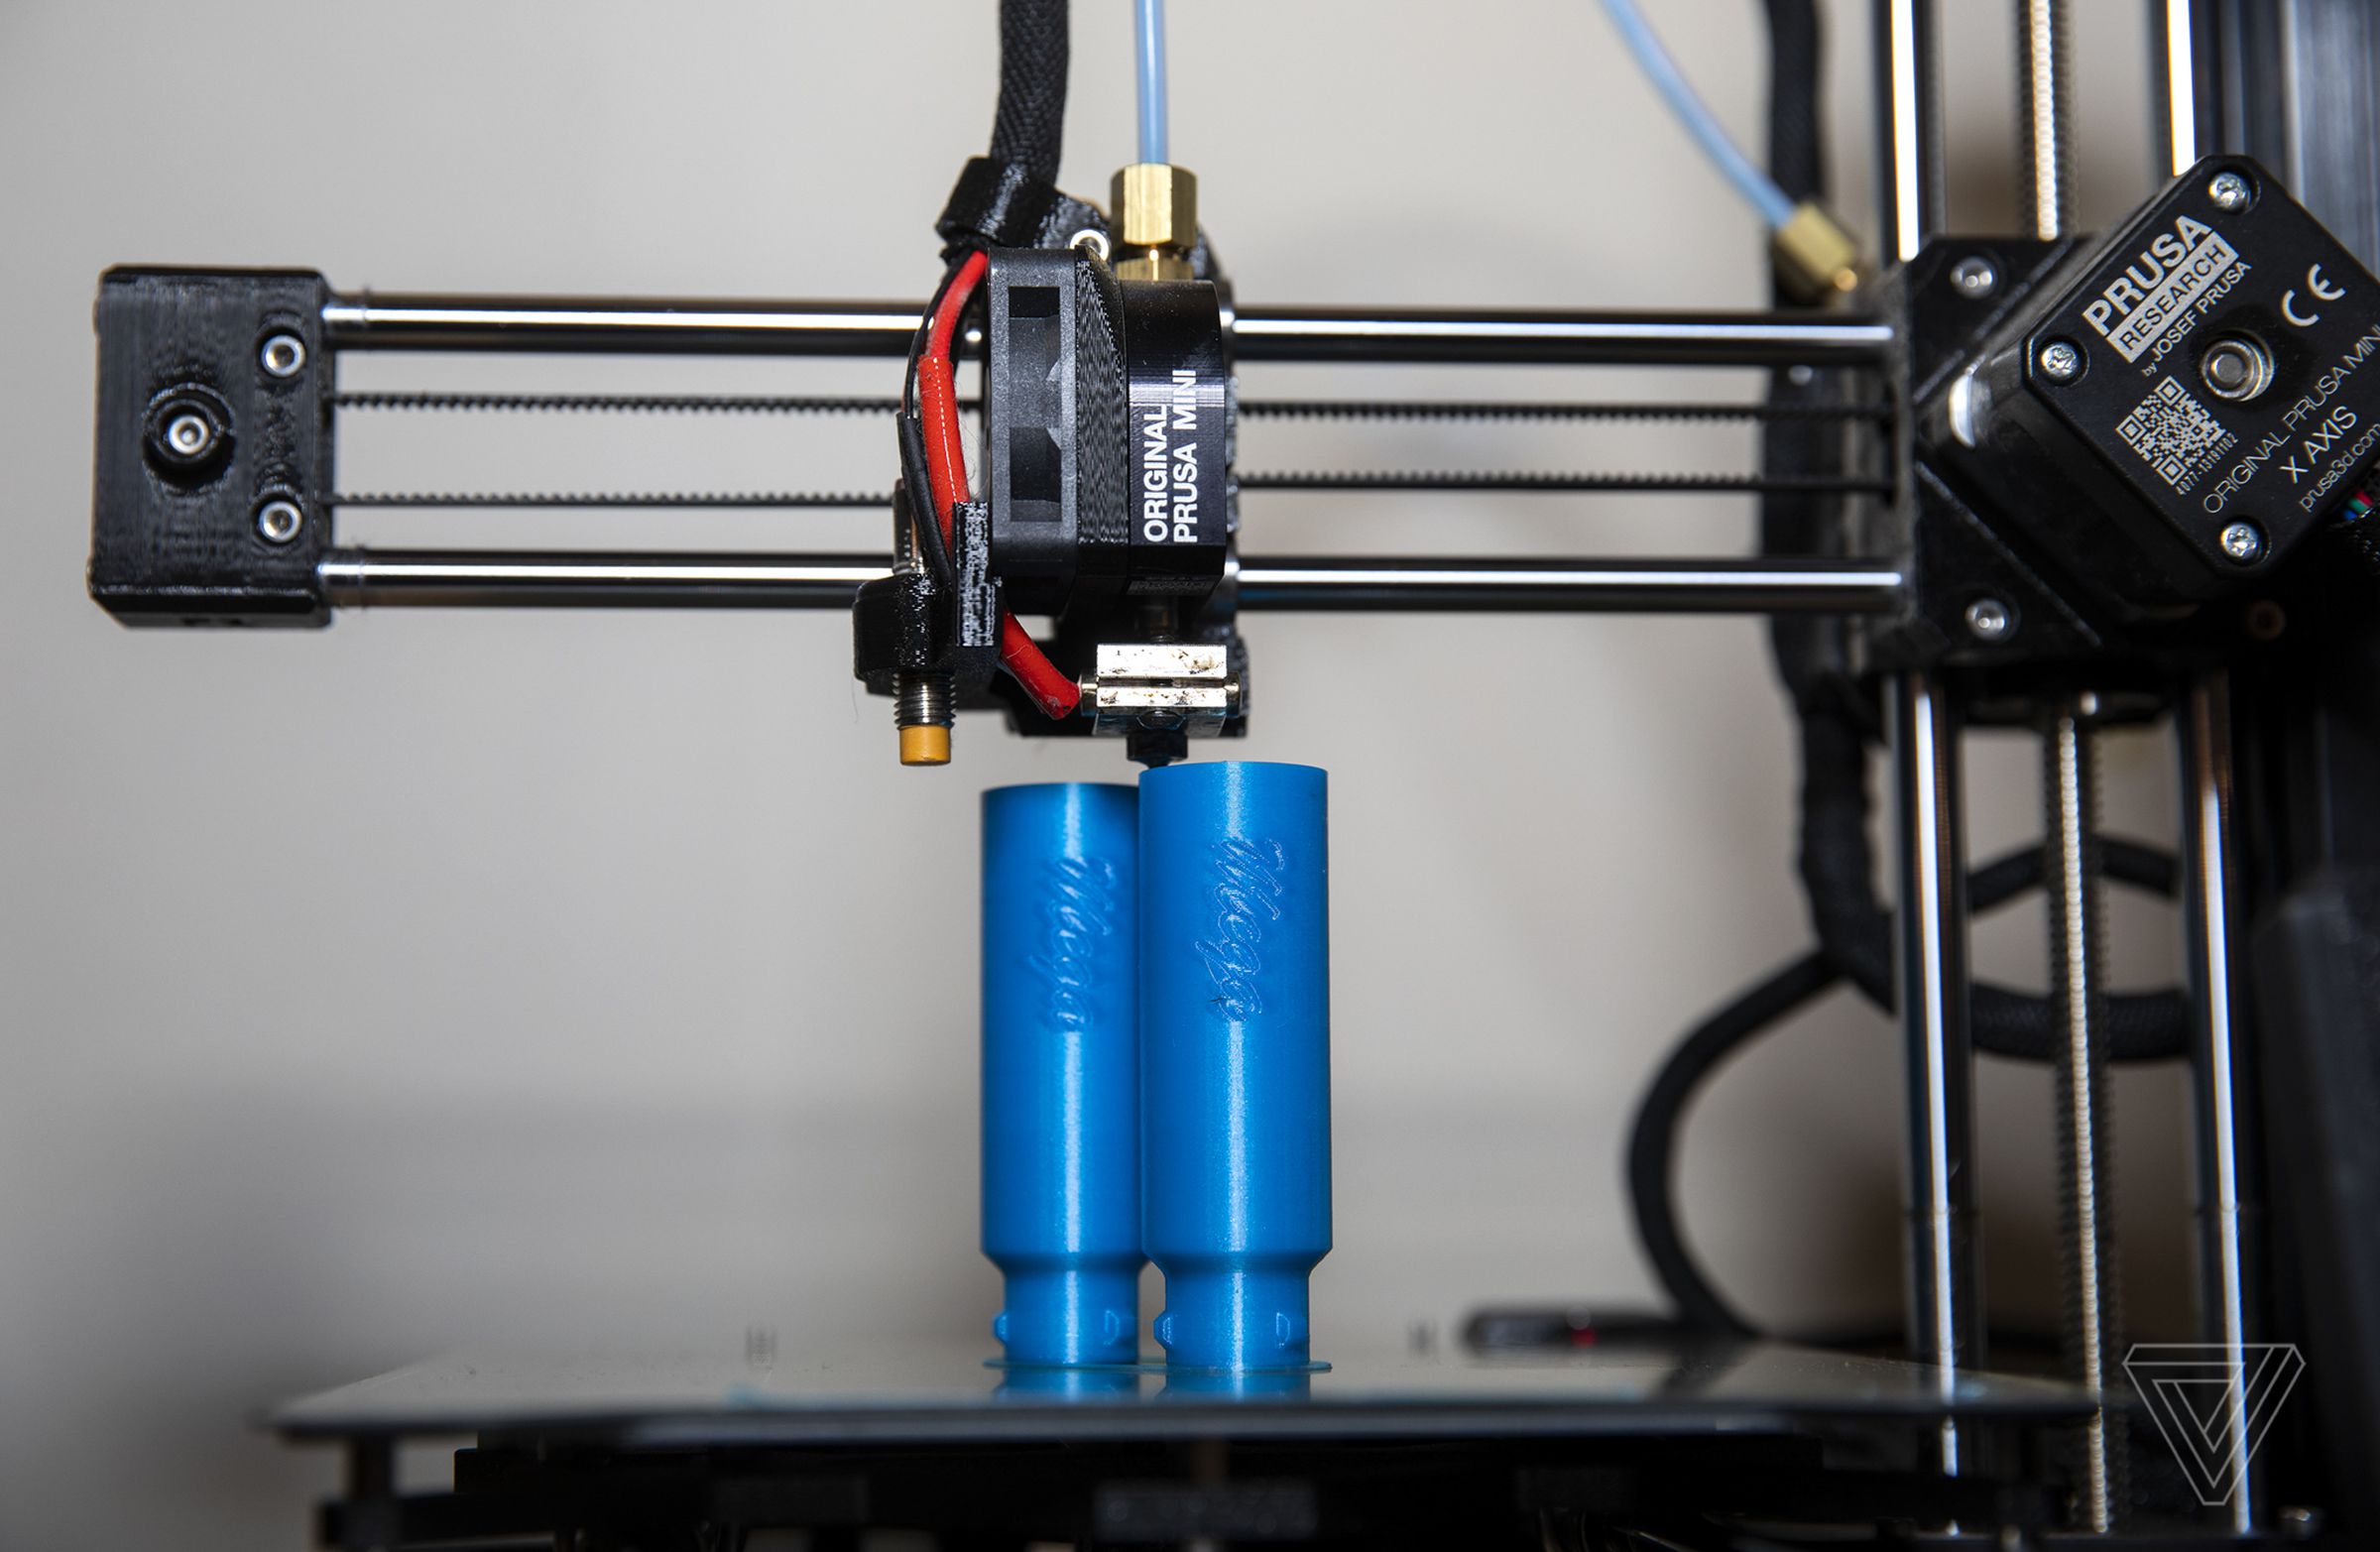 A 3D printer produces original parts at Out of Darts. Out of Darts runs 97 3D printers to produce their original blasters and modification parts.